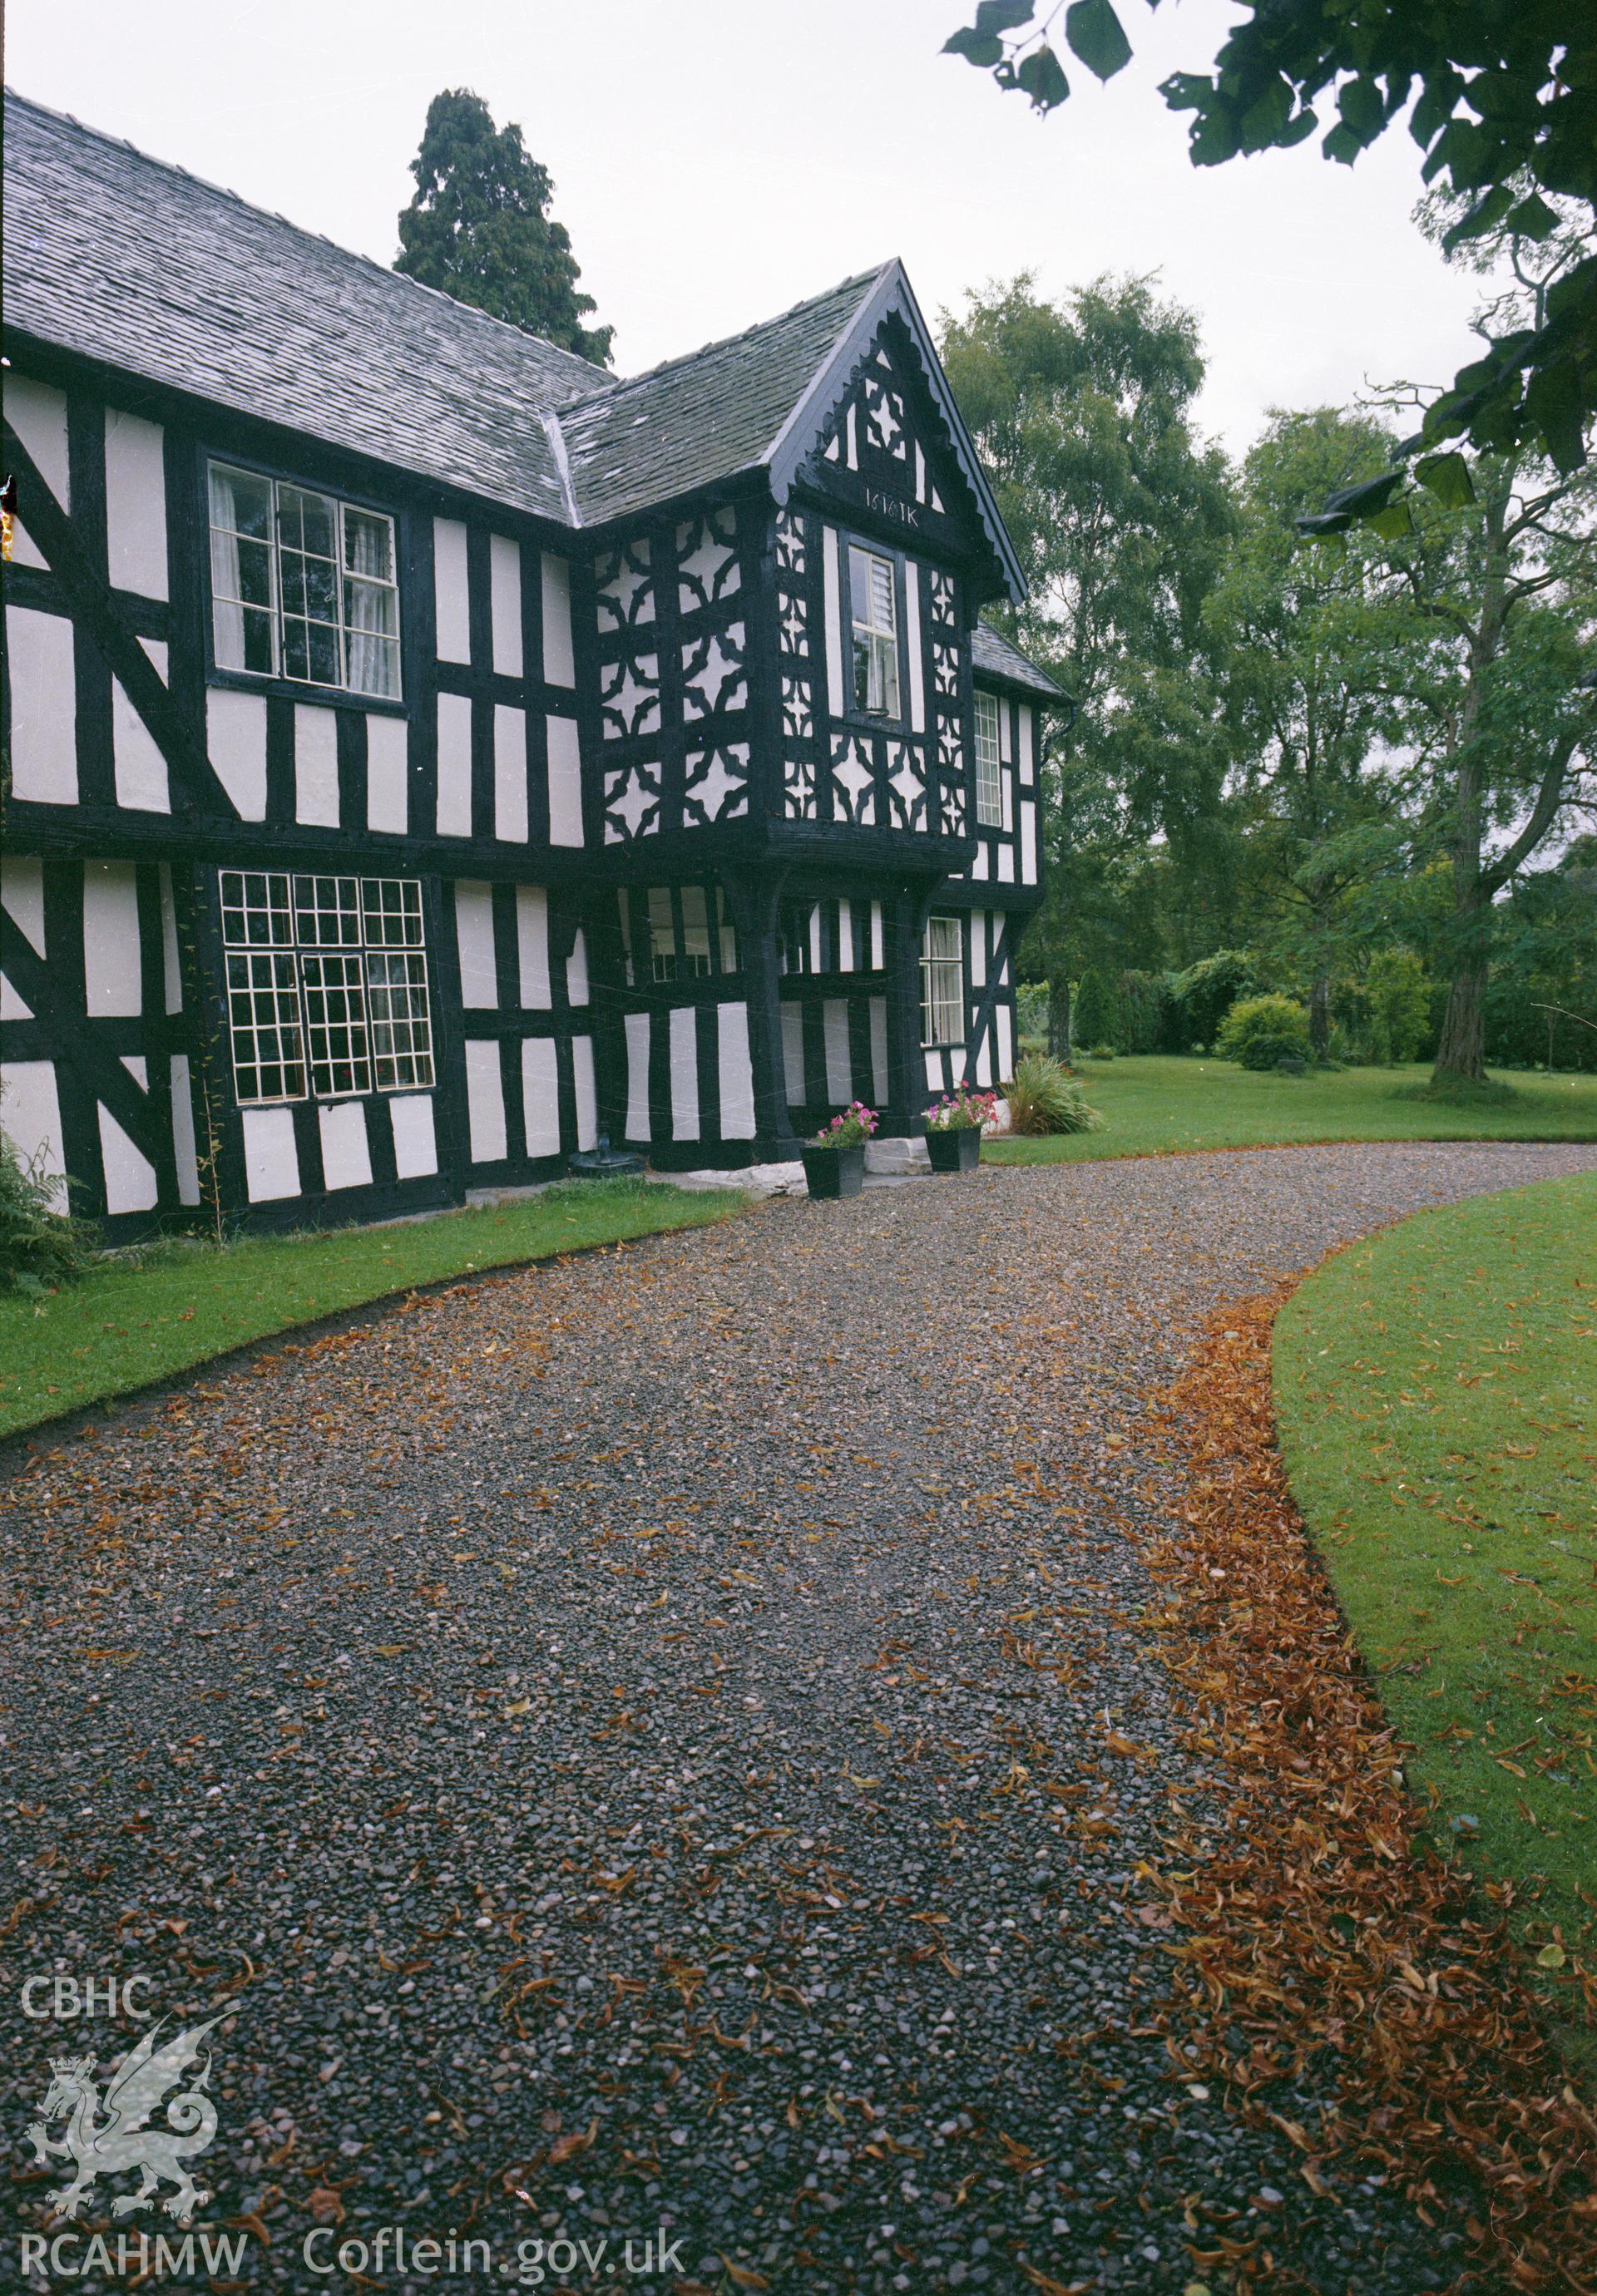 Digital copy of a colour negative showing view of The Old Vicarage, Berriew, taken by RCAHMW.